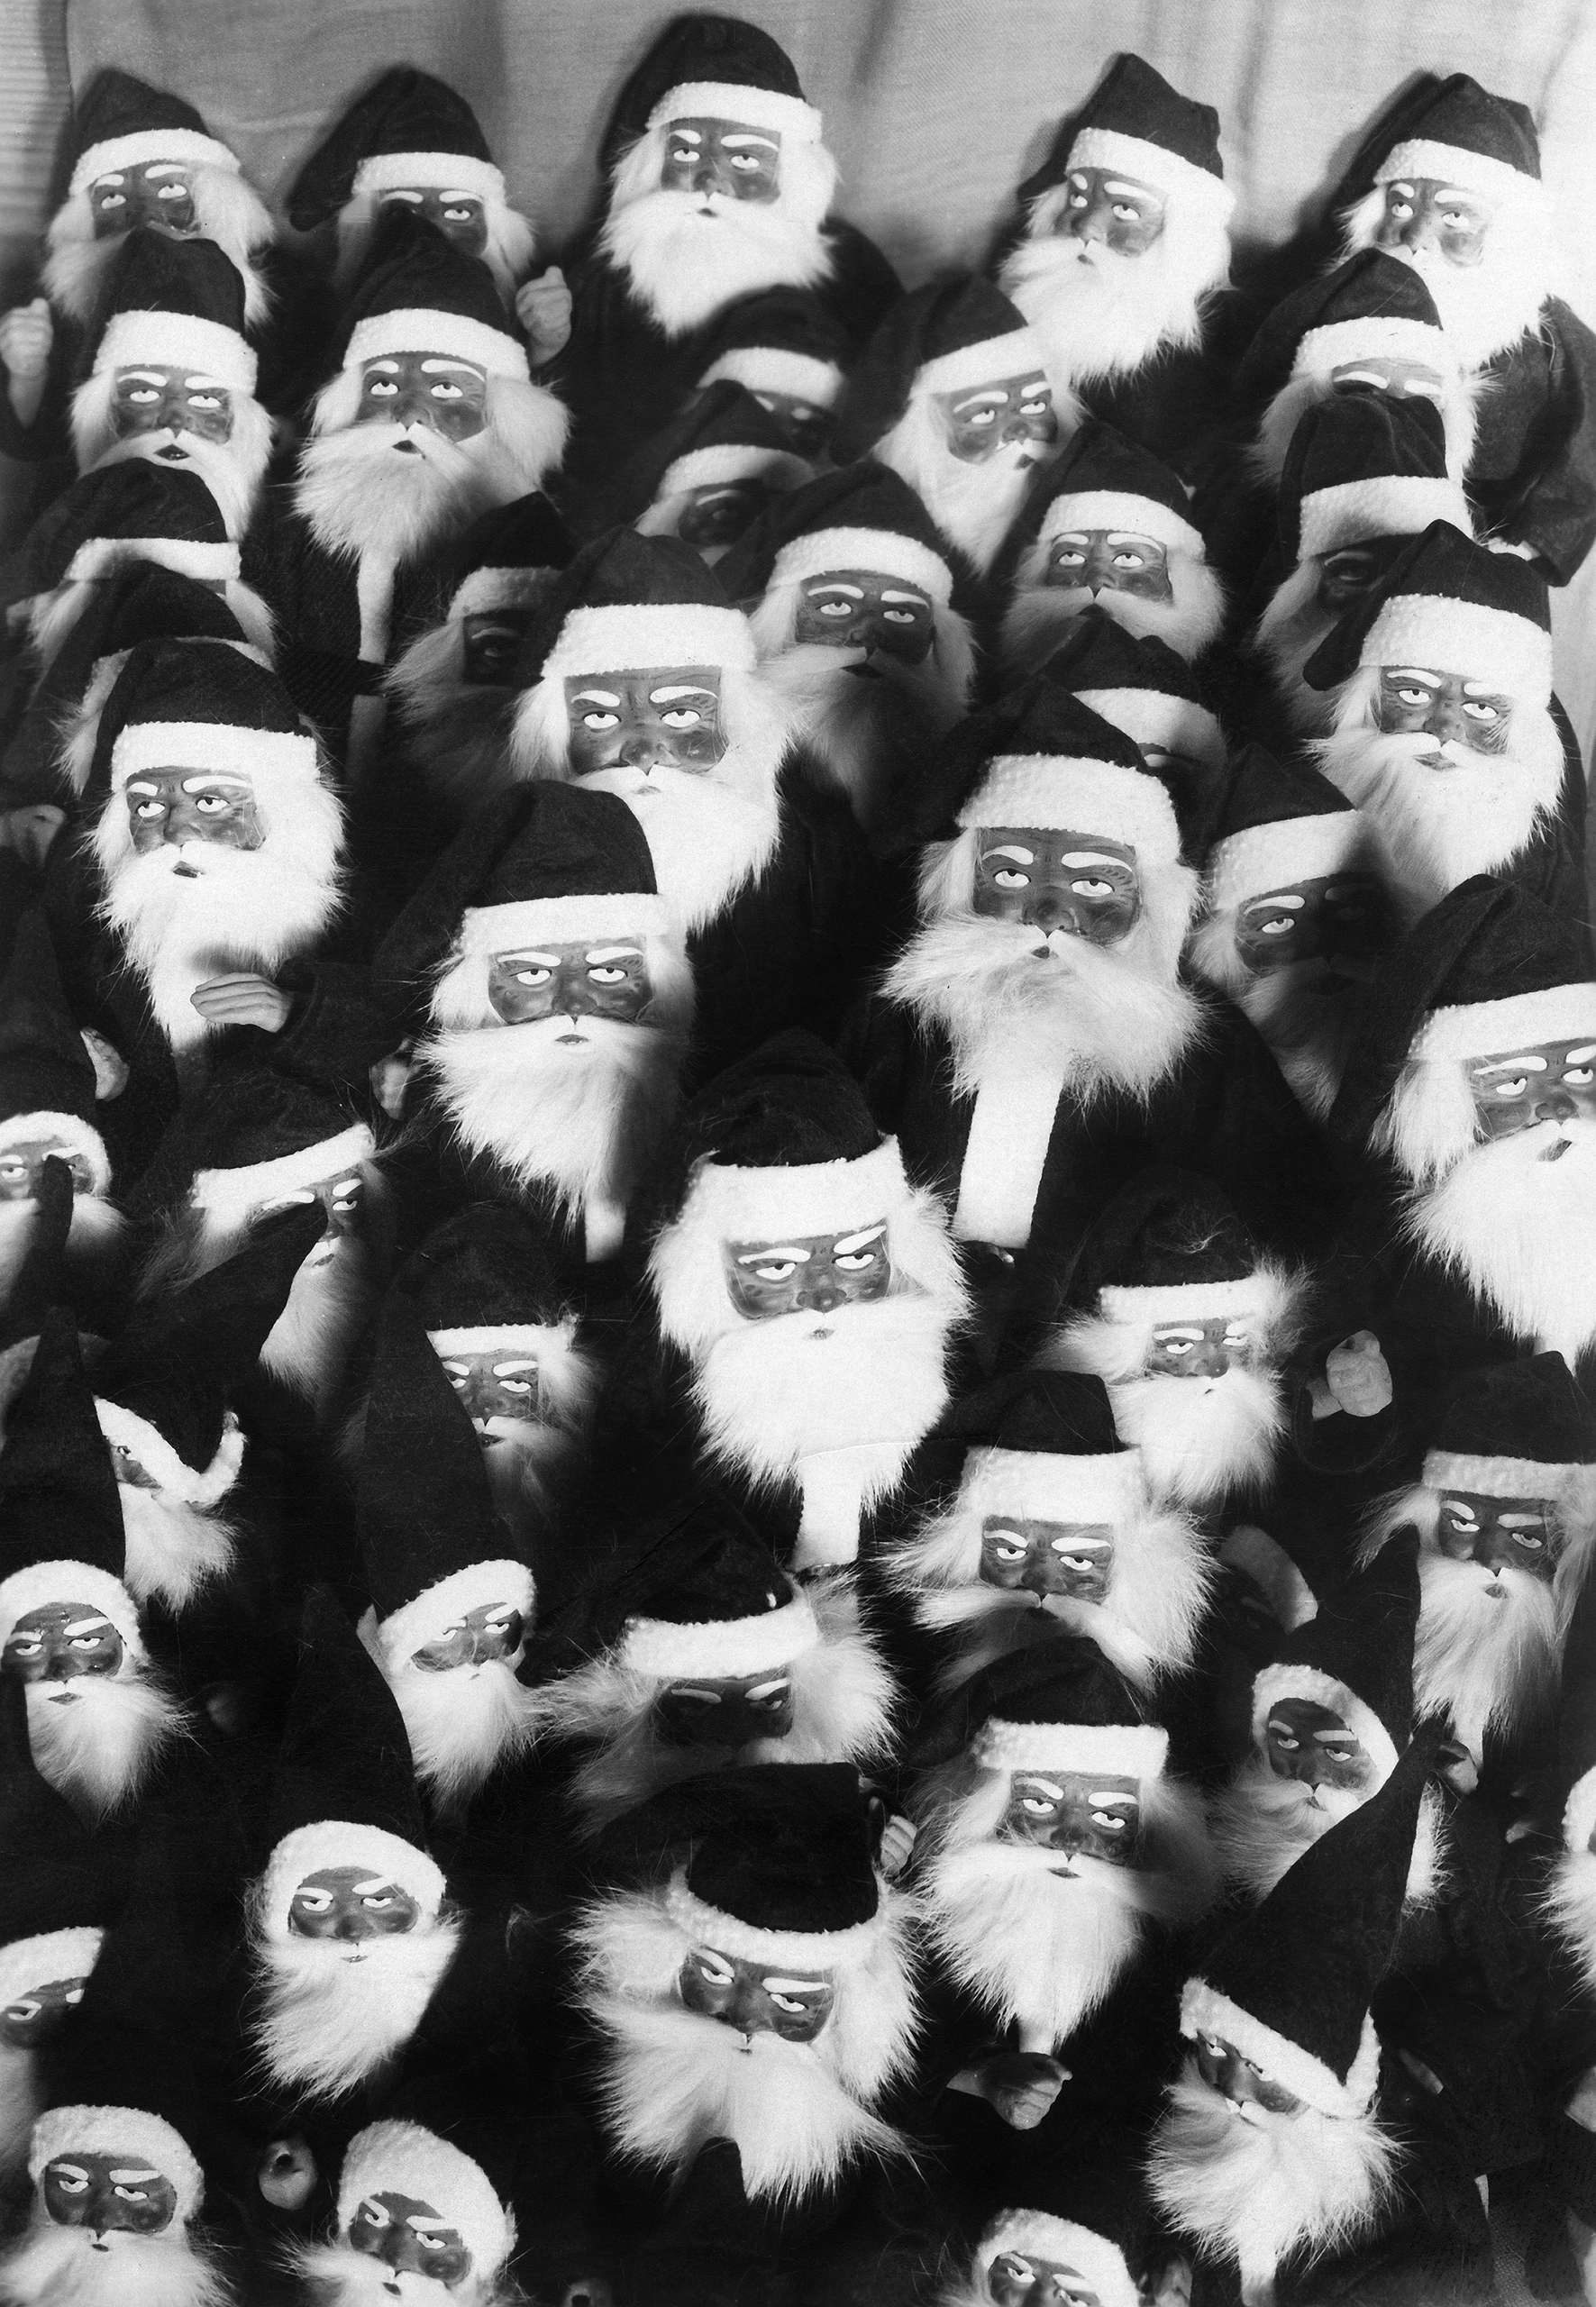 Germany. 1930. Christmas time collection of Santa Claus dolls.